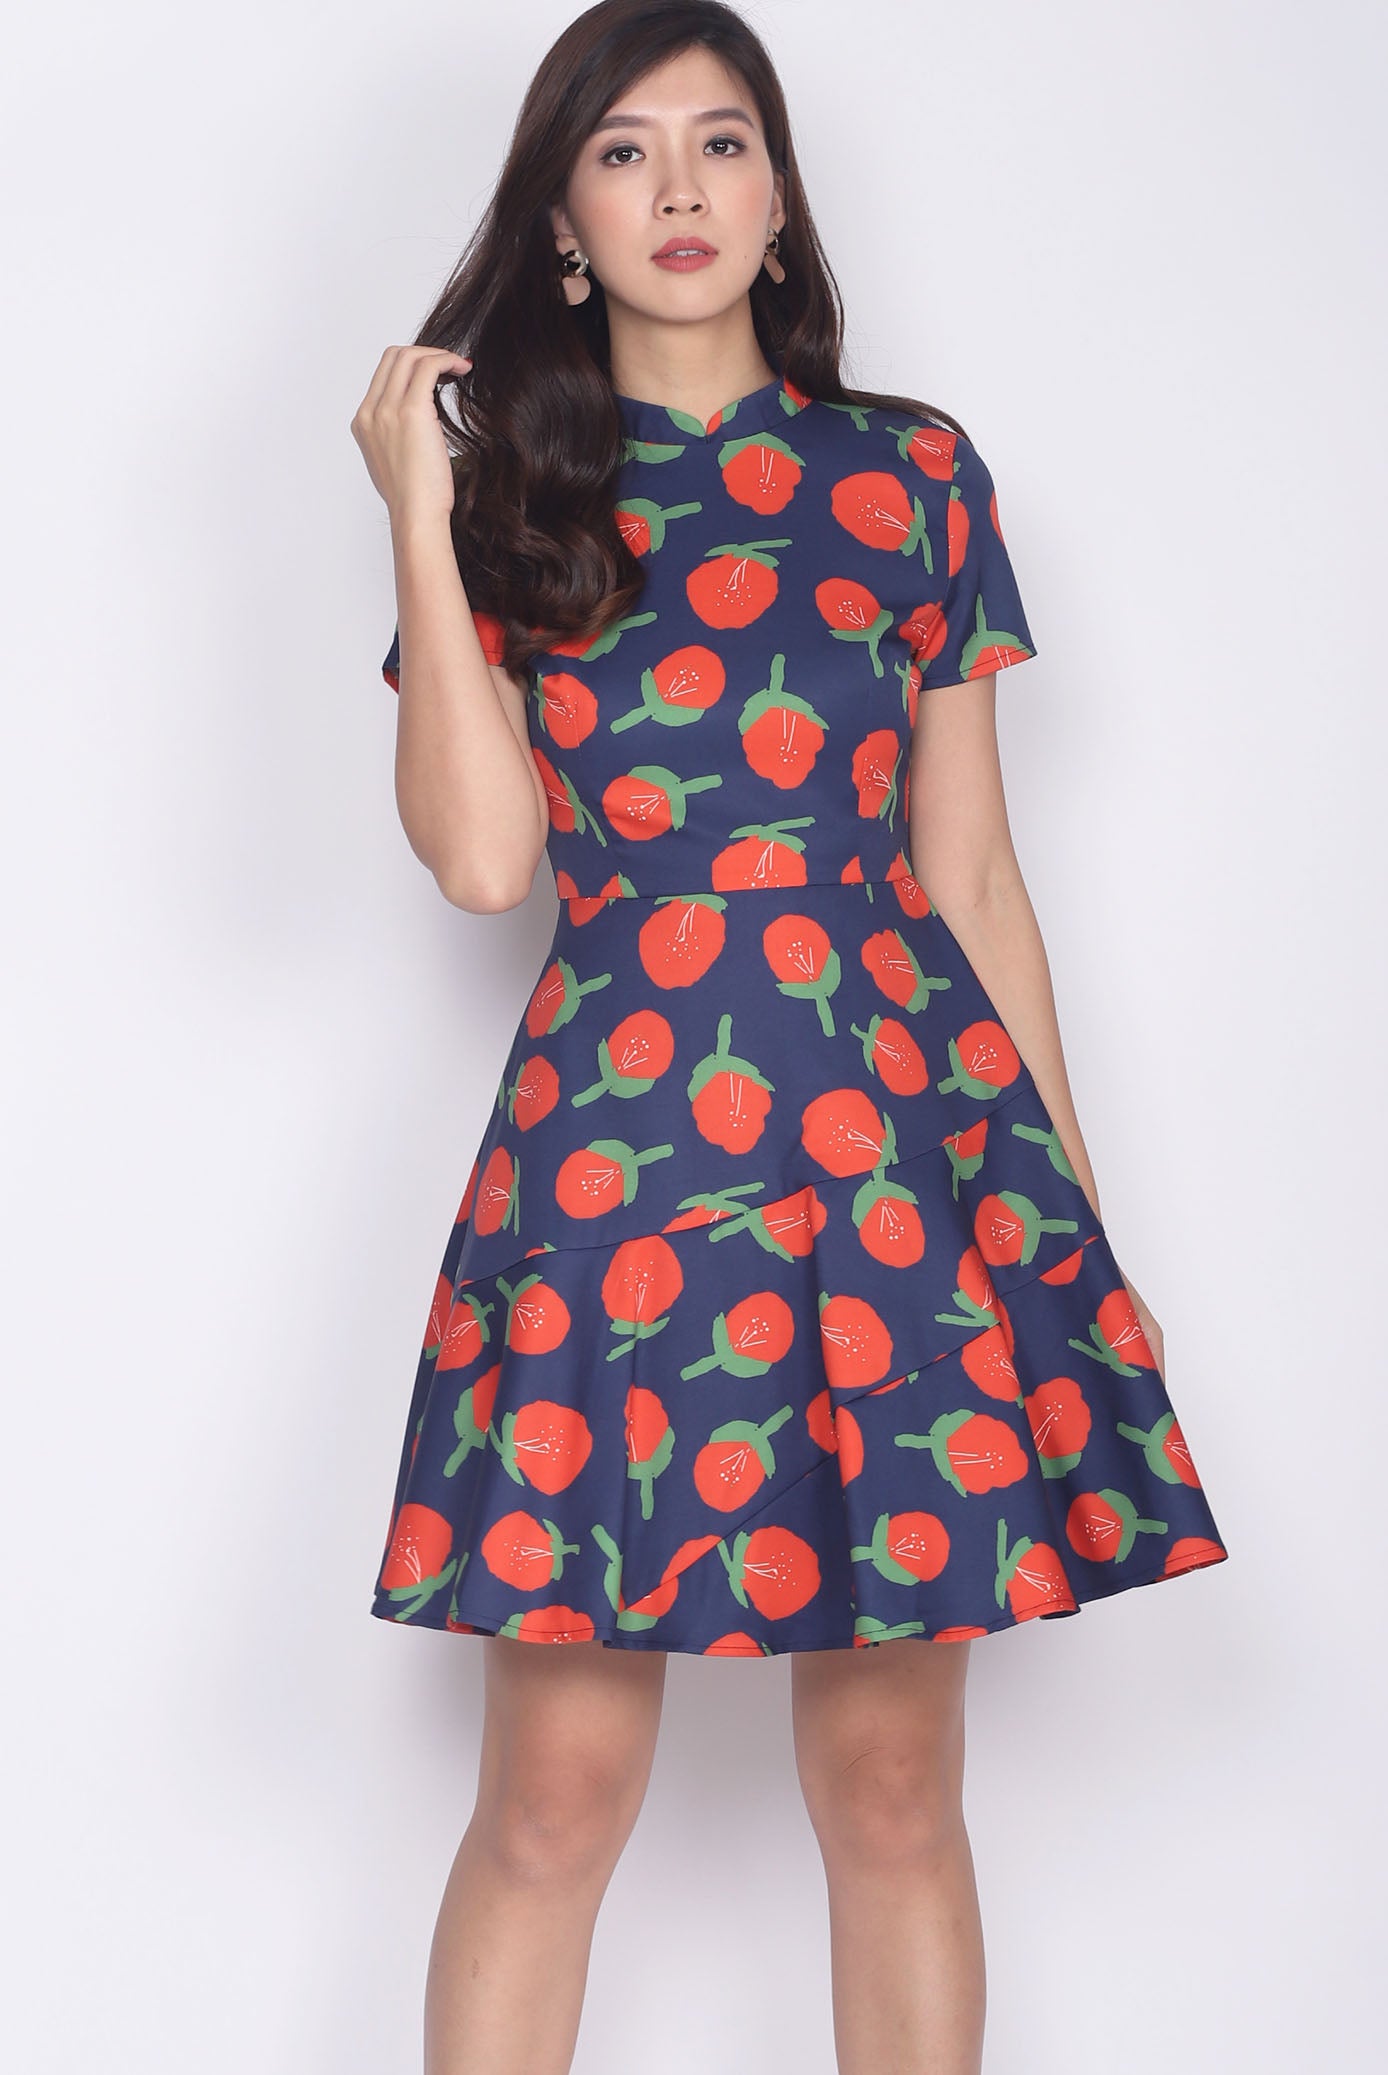 Aalin Red Floral Removable Cheong Sam Collar Dress In Navy Blue